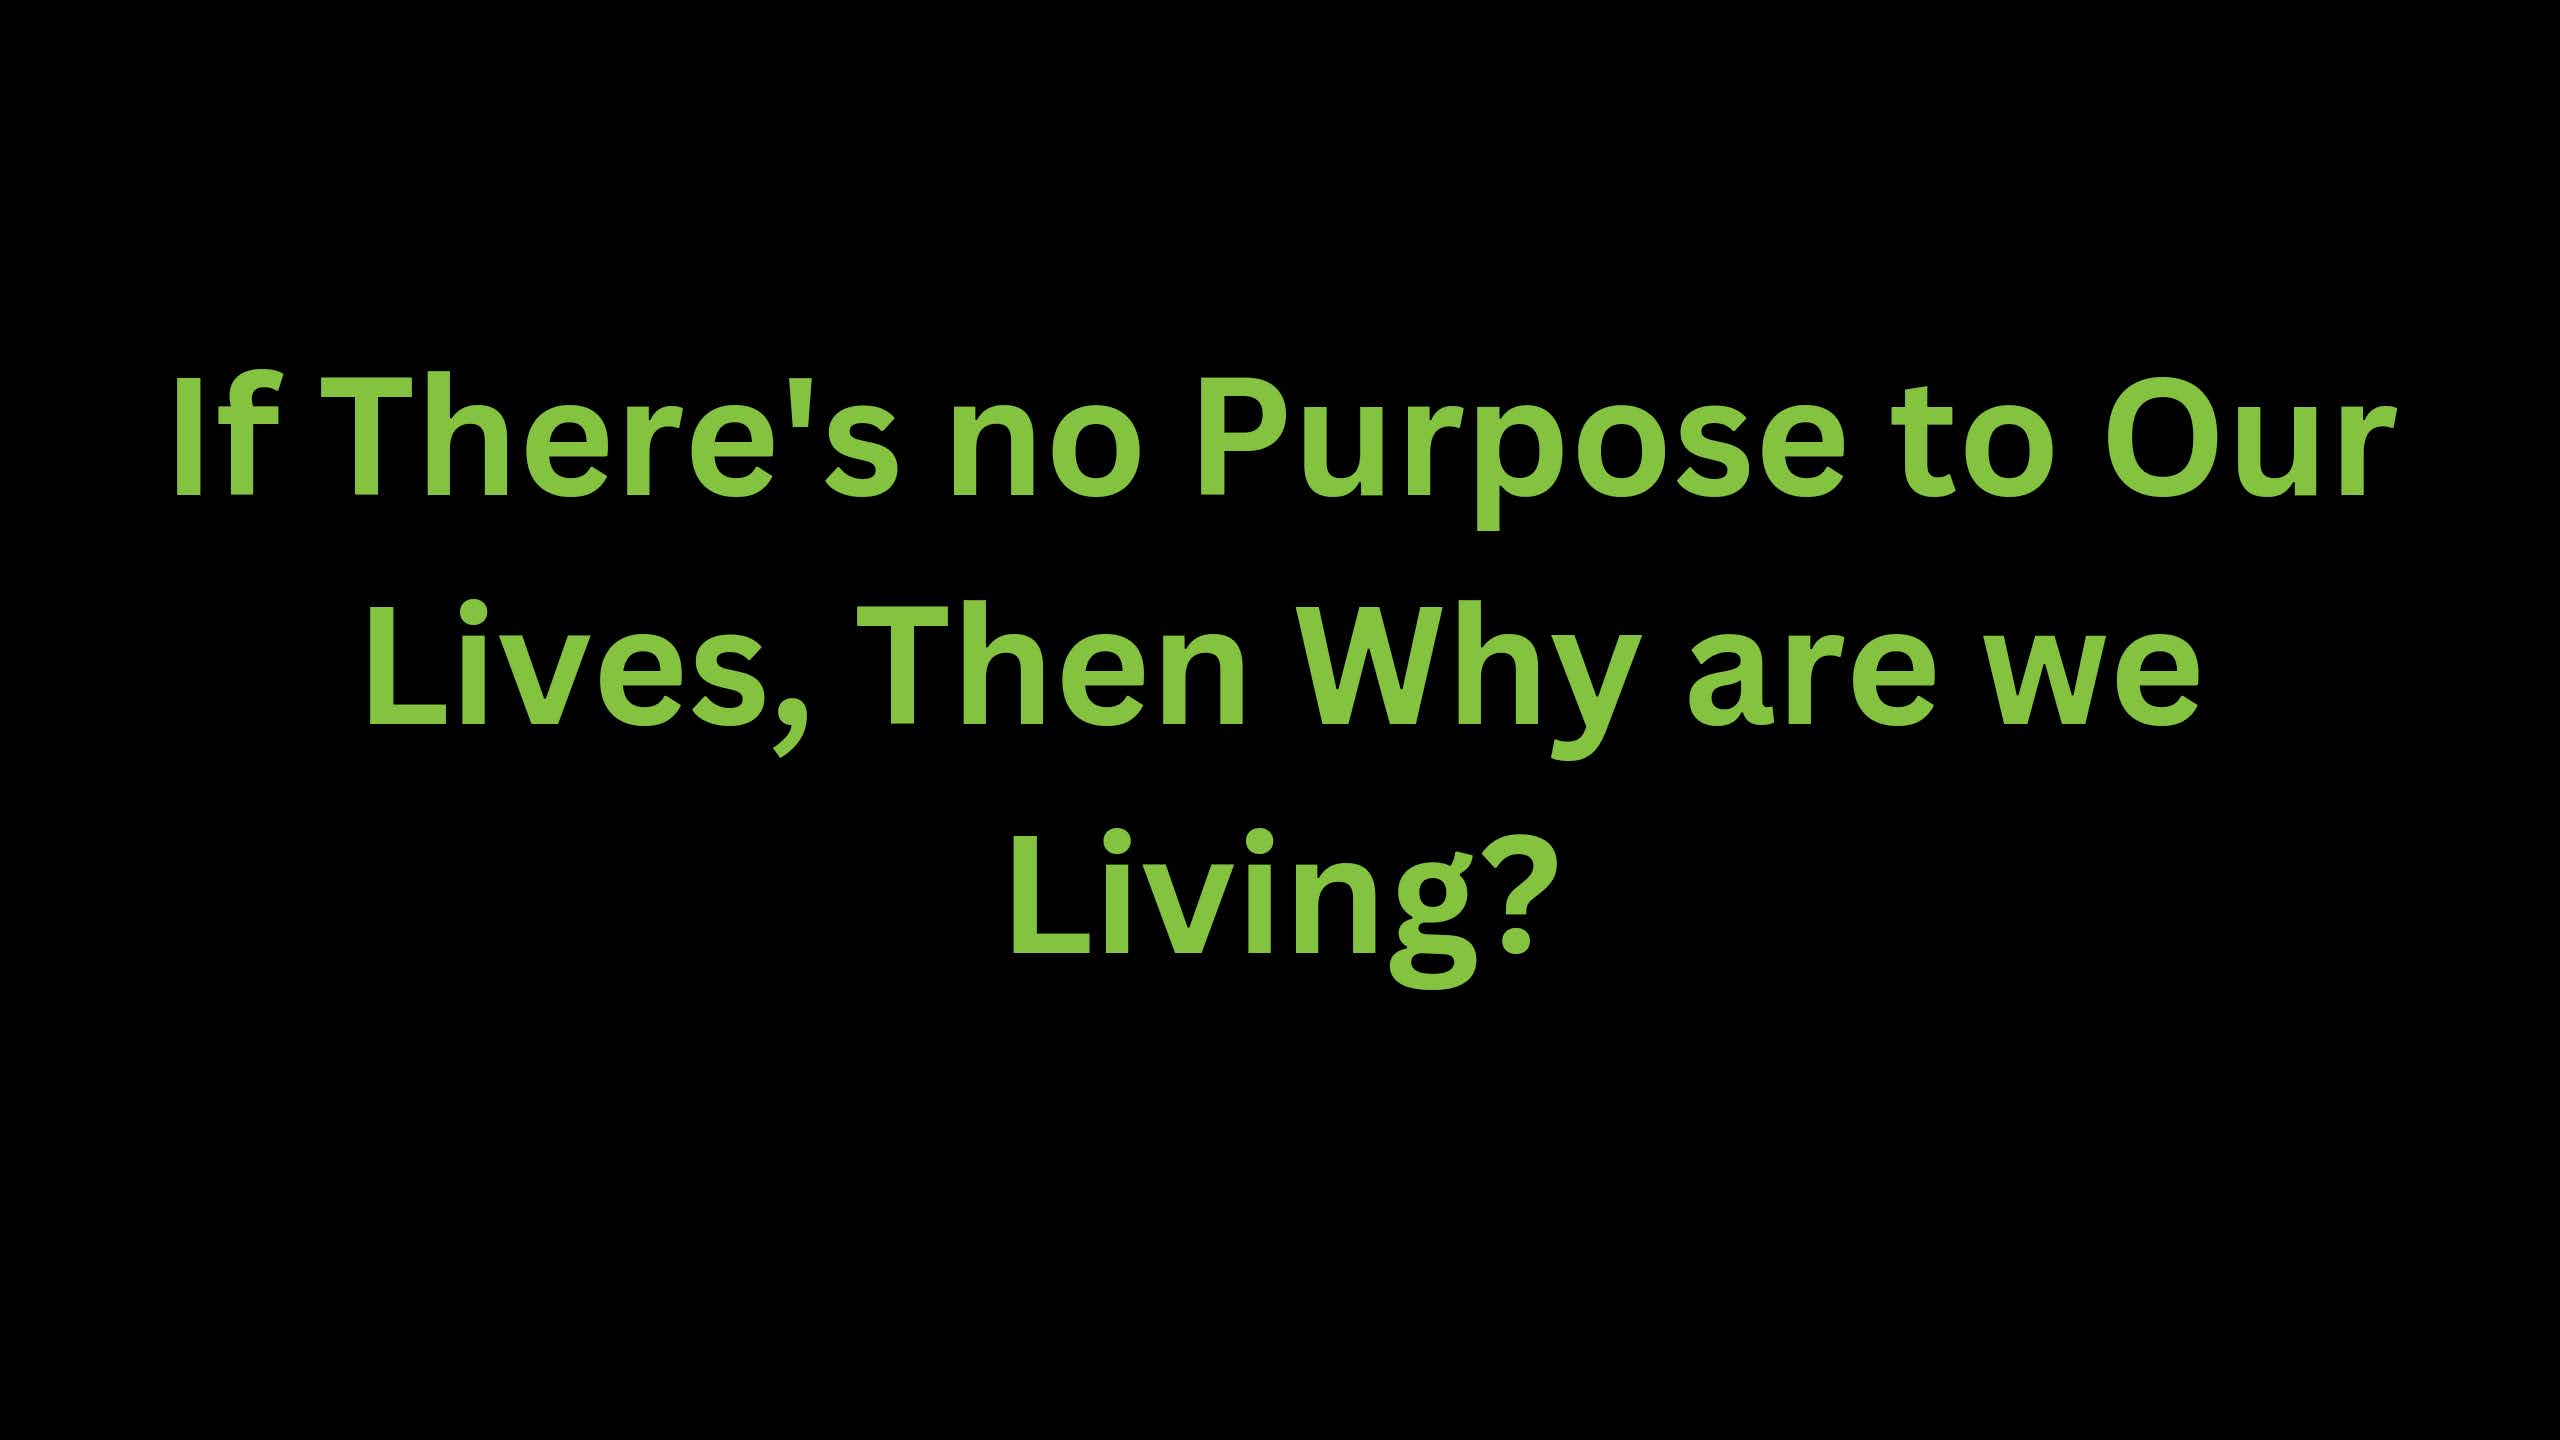 You are currently viewing If There’s no Purpose to Our Lives, Why are we Living?